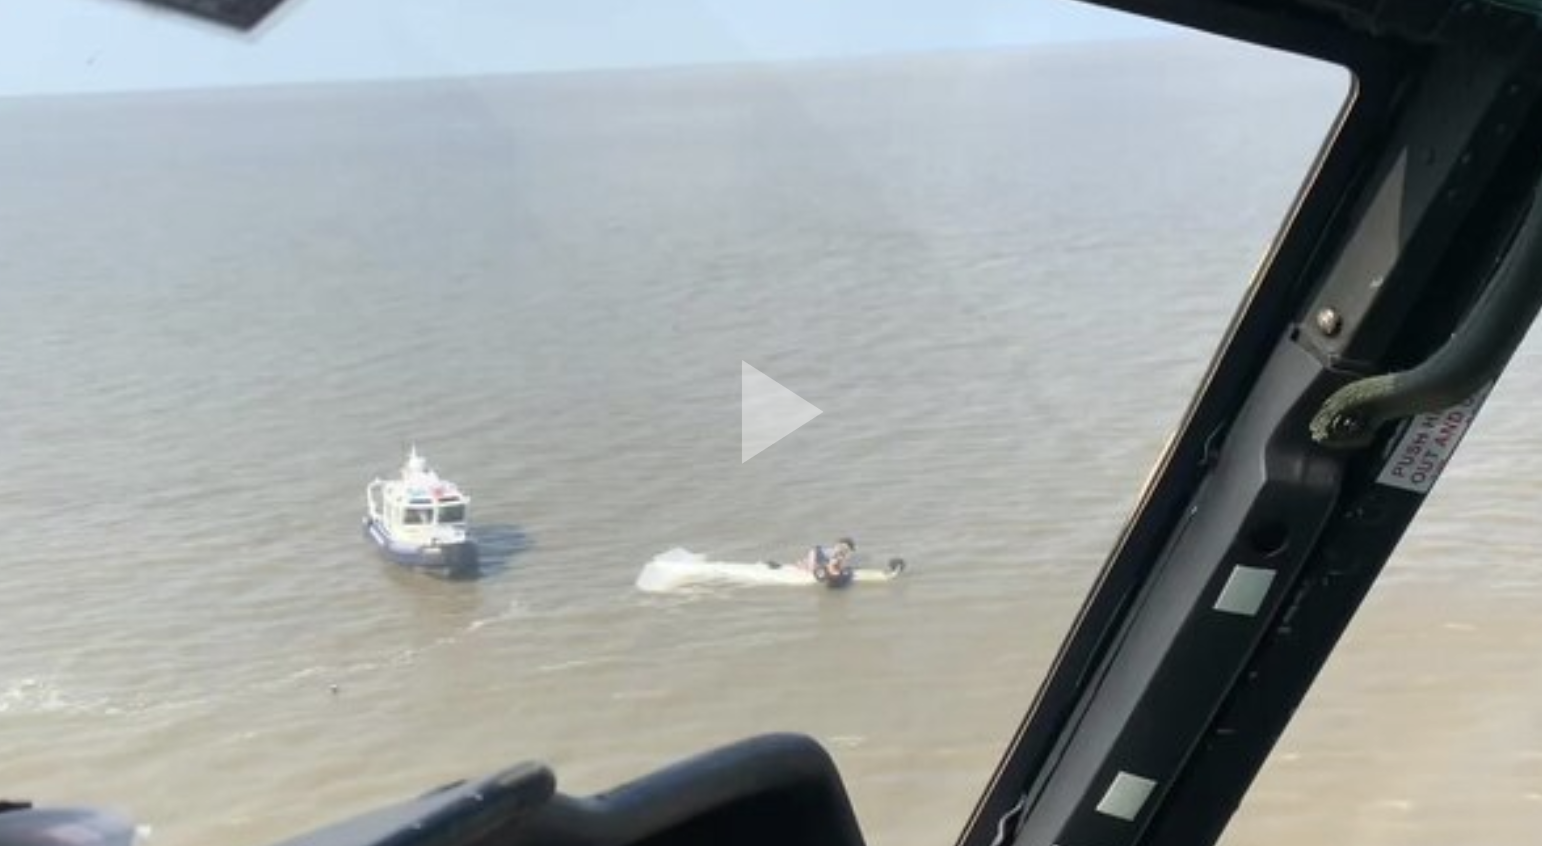 A Coast Guard Air Station New Orleans MH-65 Dolphin helicopter crew along with a St. Mary's Parish Sheriff's boatcrew assisted a person from a downed aircraft July 27, 2021 in Fourleague Bay, which is south of Morgan City, Louisiana.